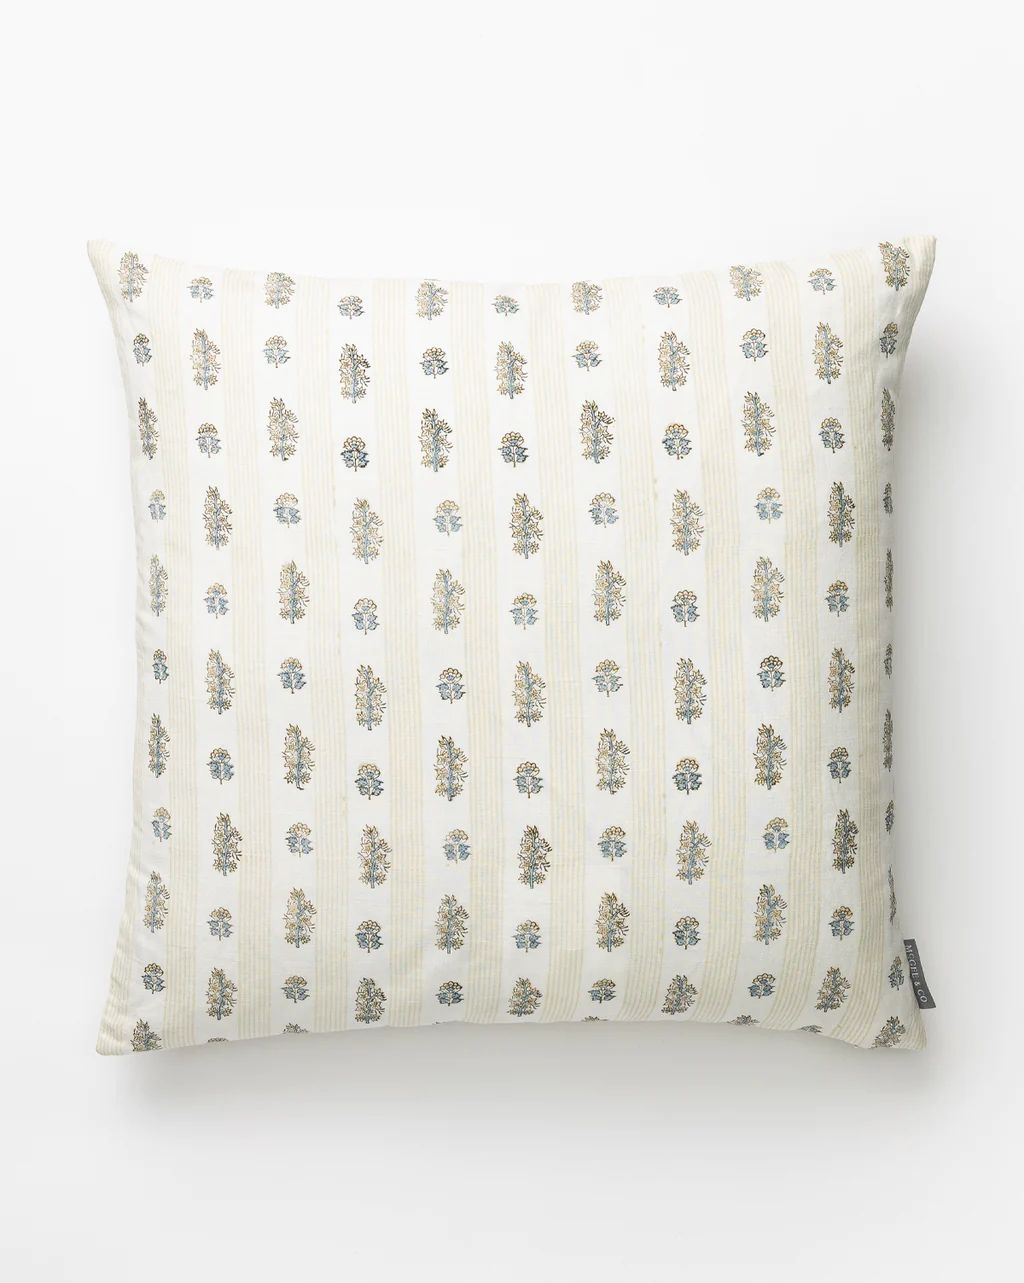 Roselle Patterned Pillow Cover | McGee & Co.